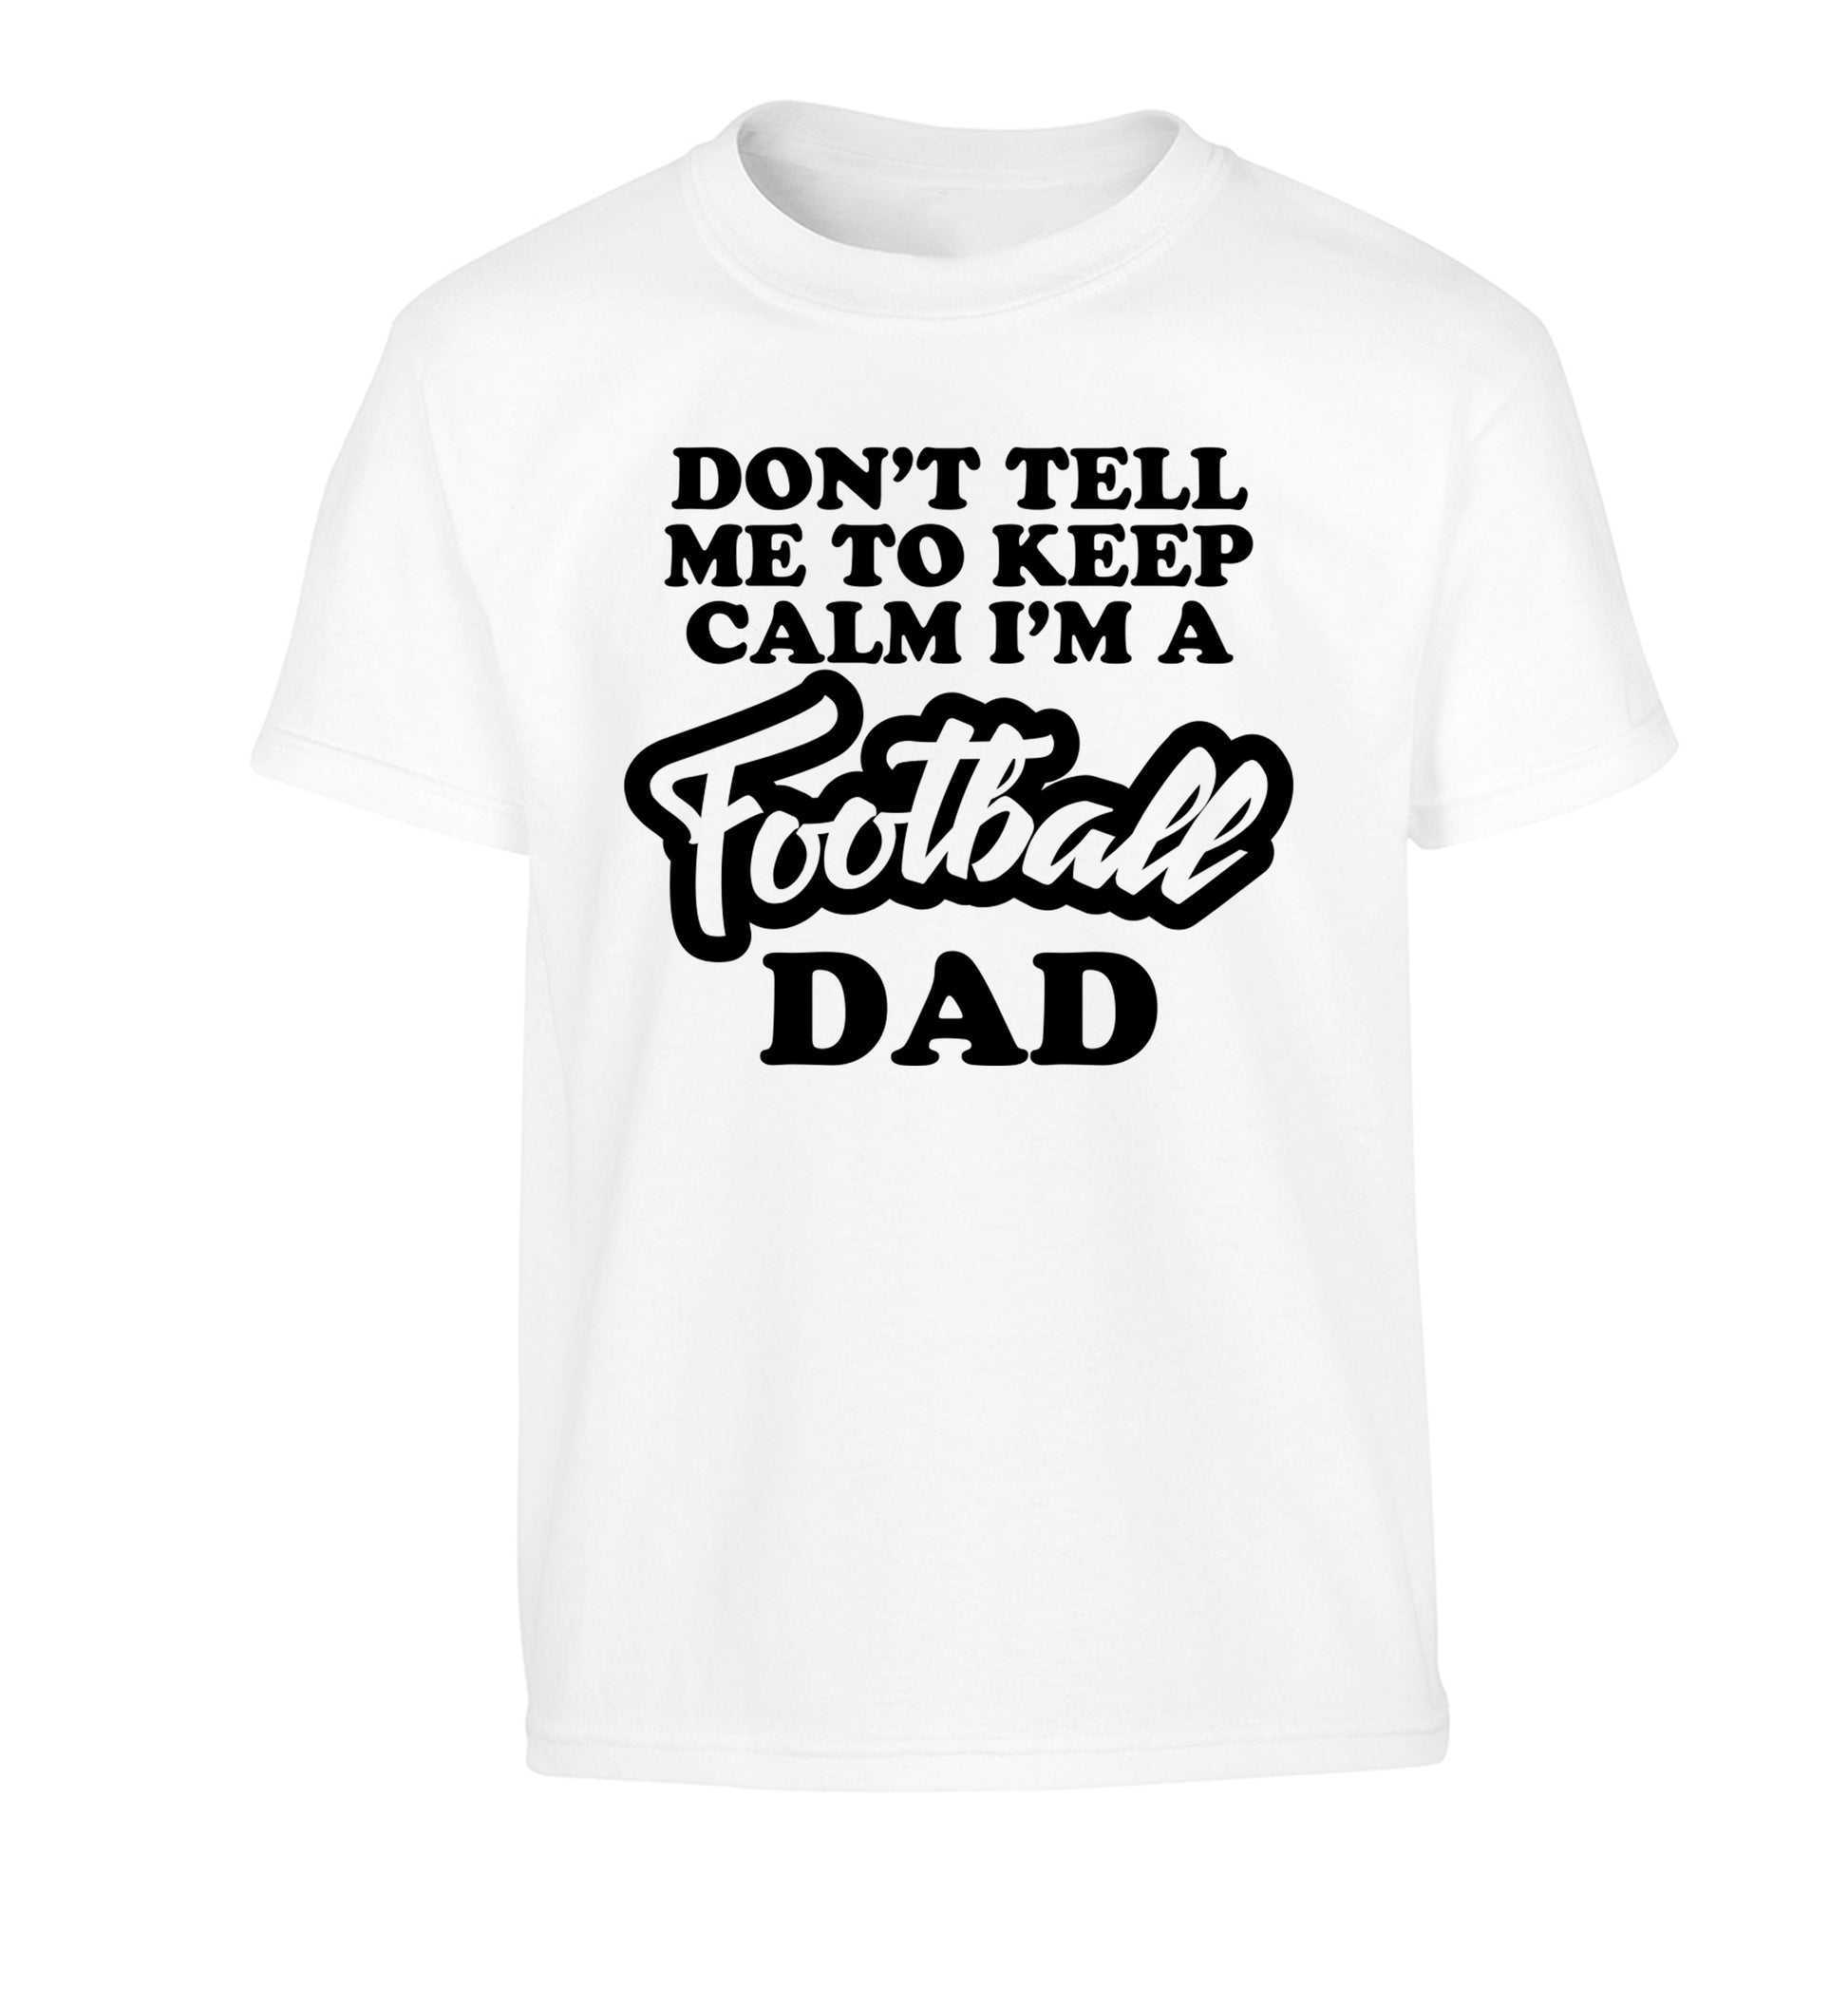 Don't tell me to keep calm I'm a football dad Children's white Tshirt 12-14 Years